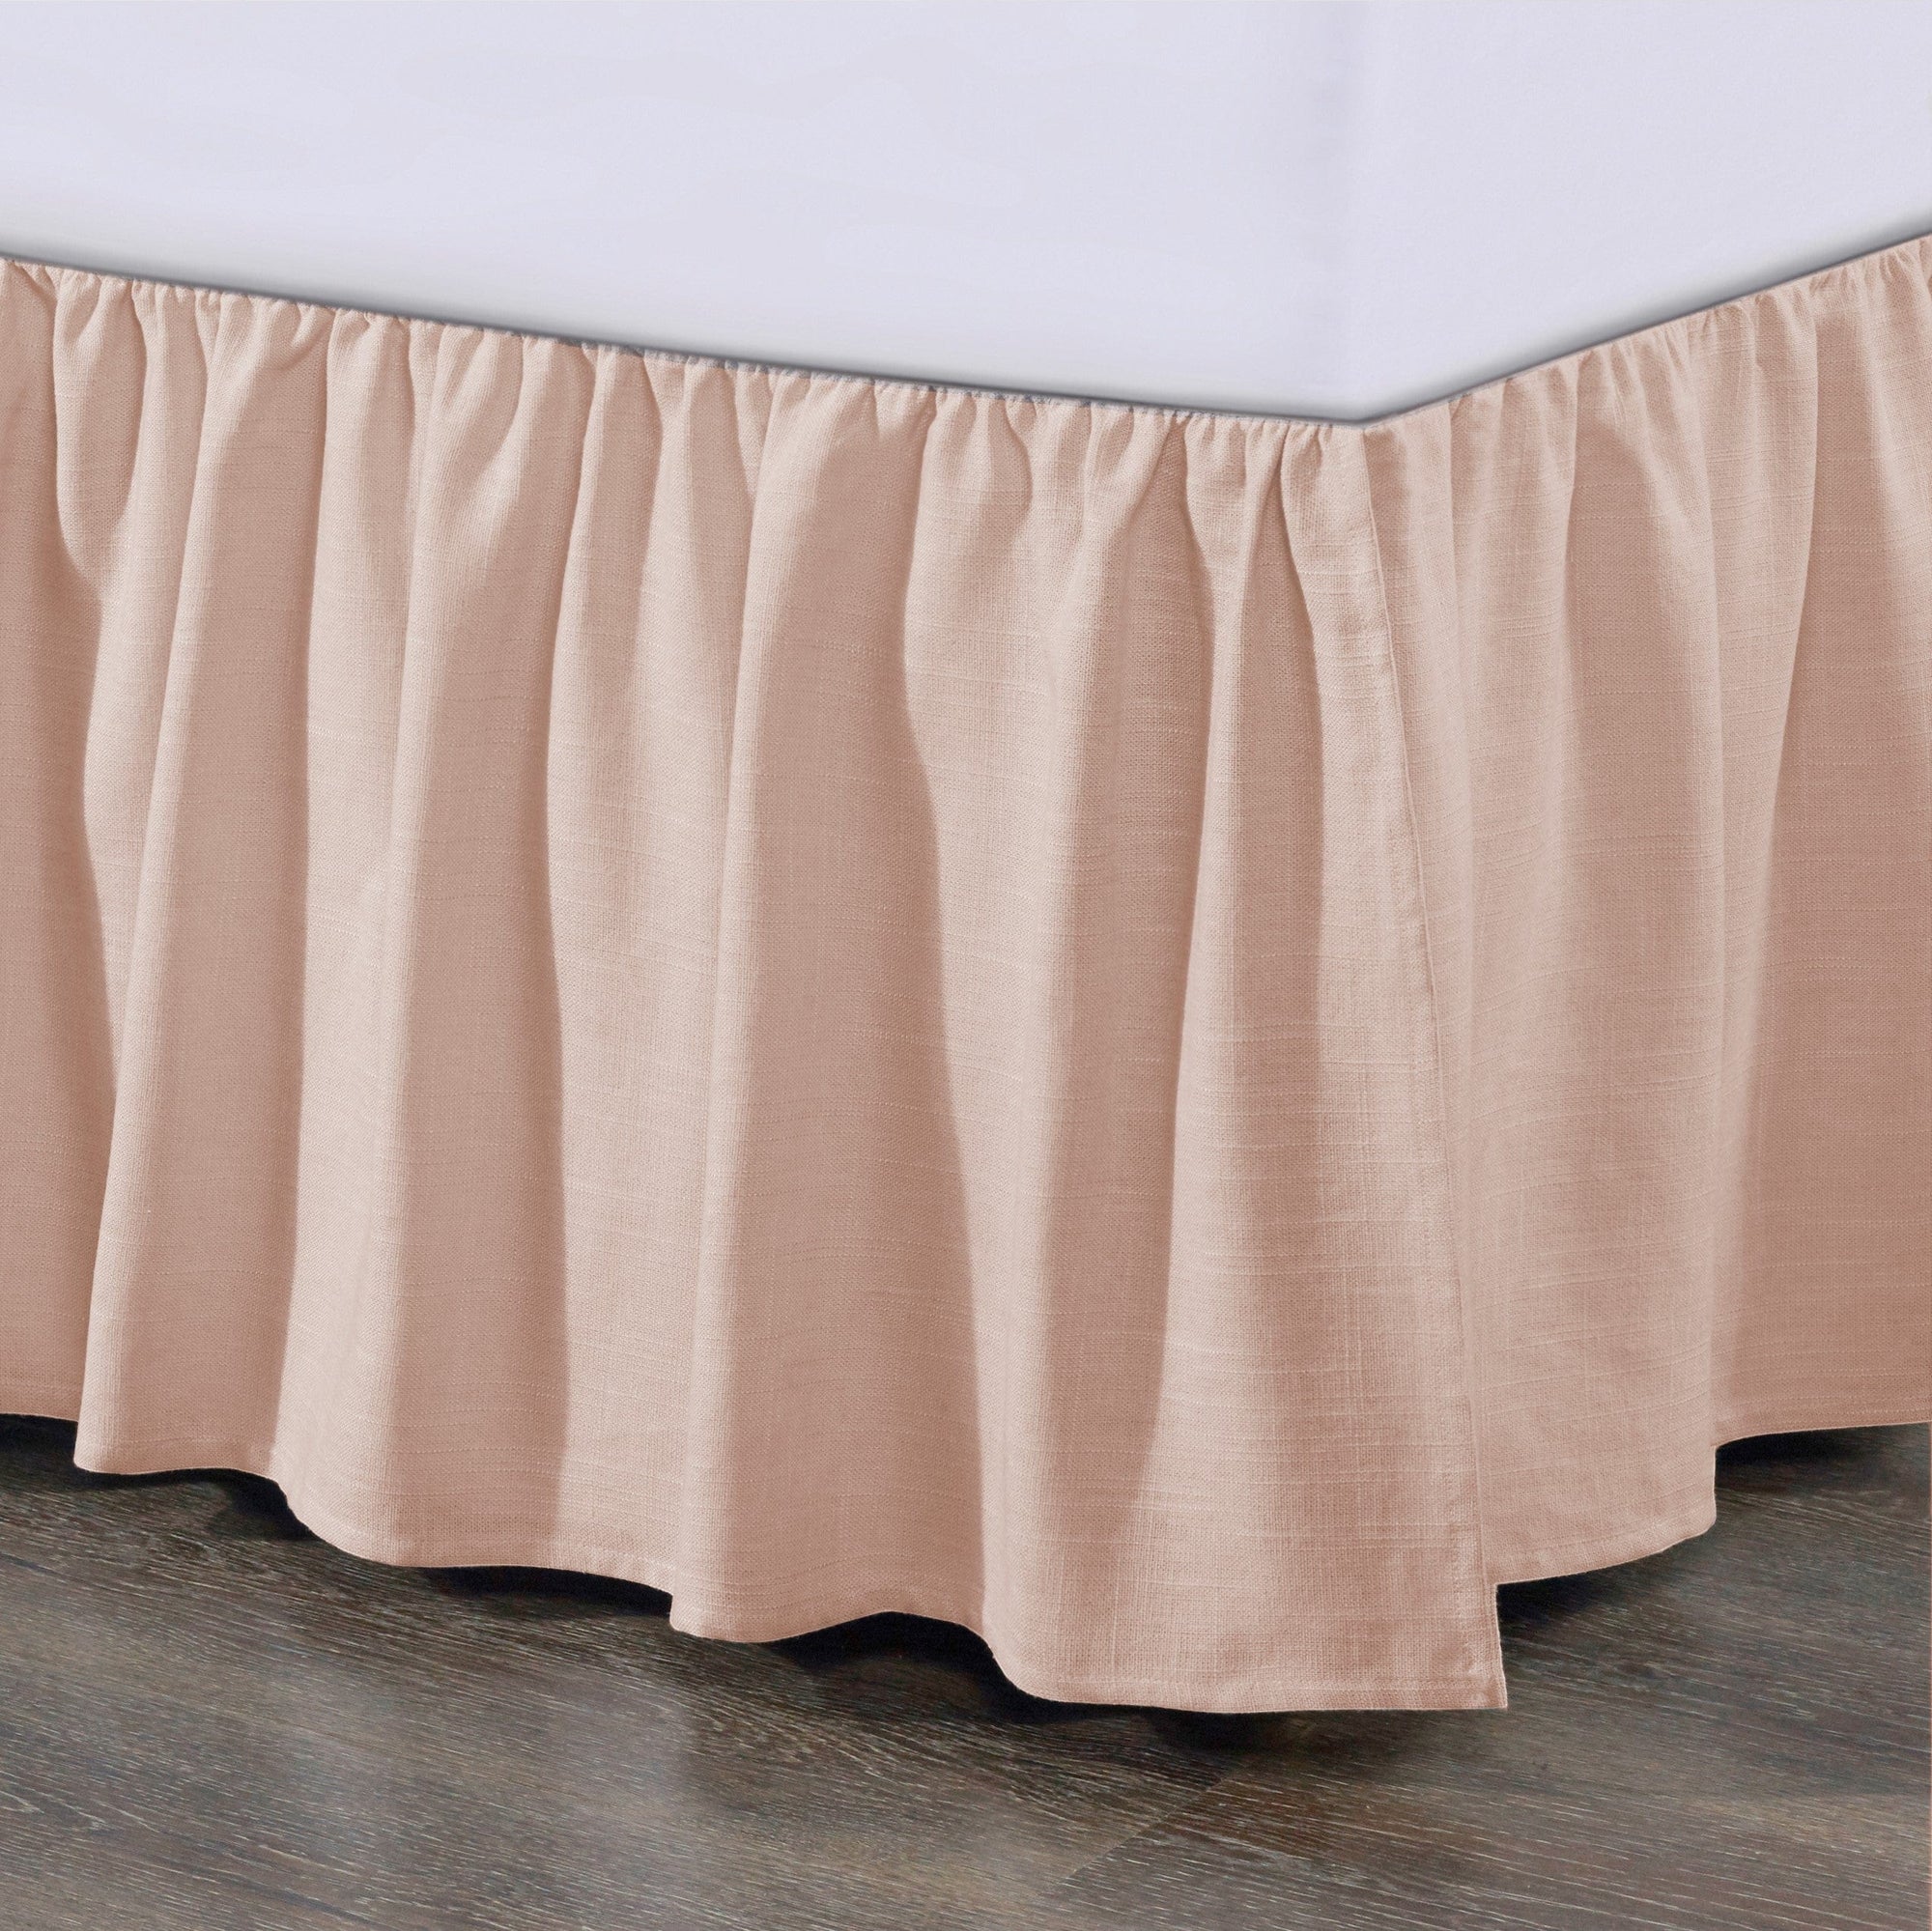 Lily Gathered Linen Bed Skirt Queen / Blush Bed Skirt